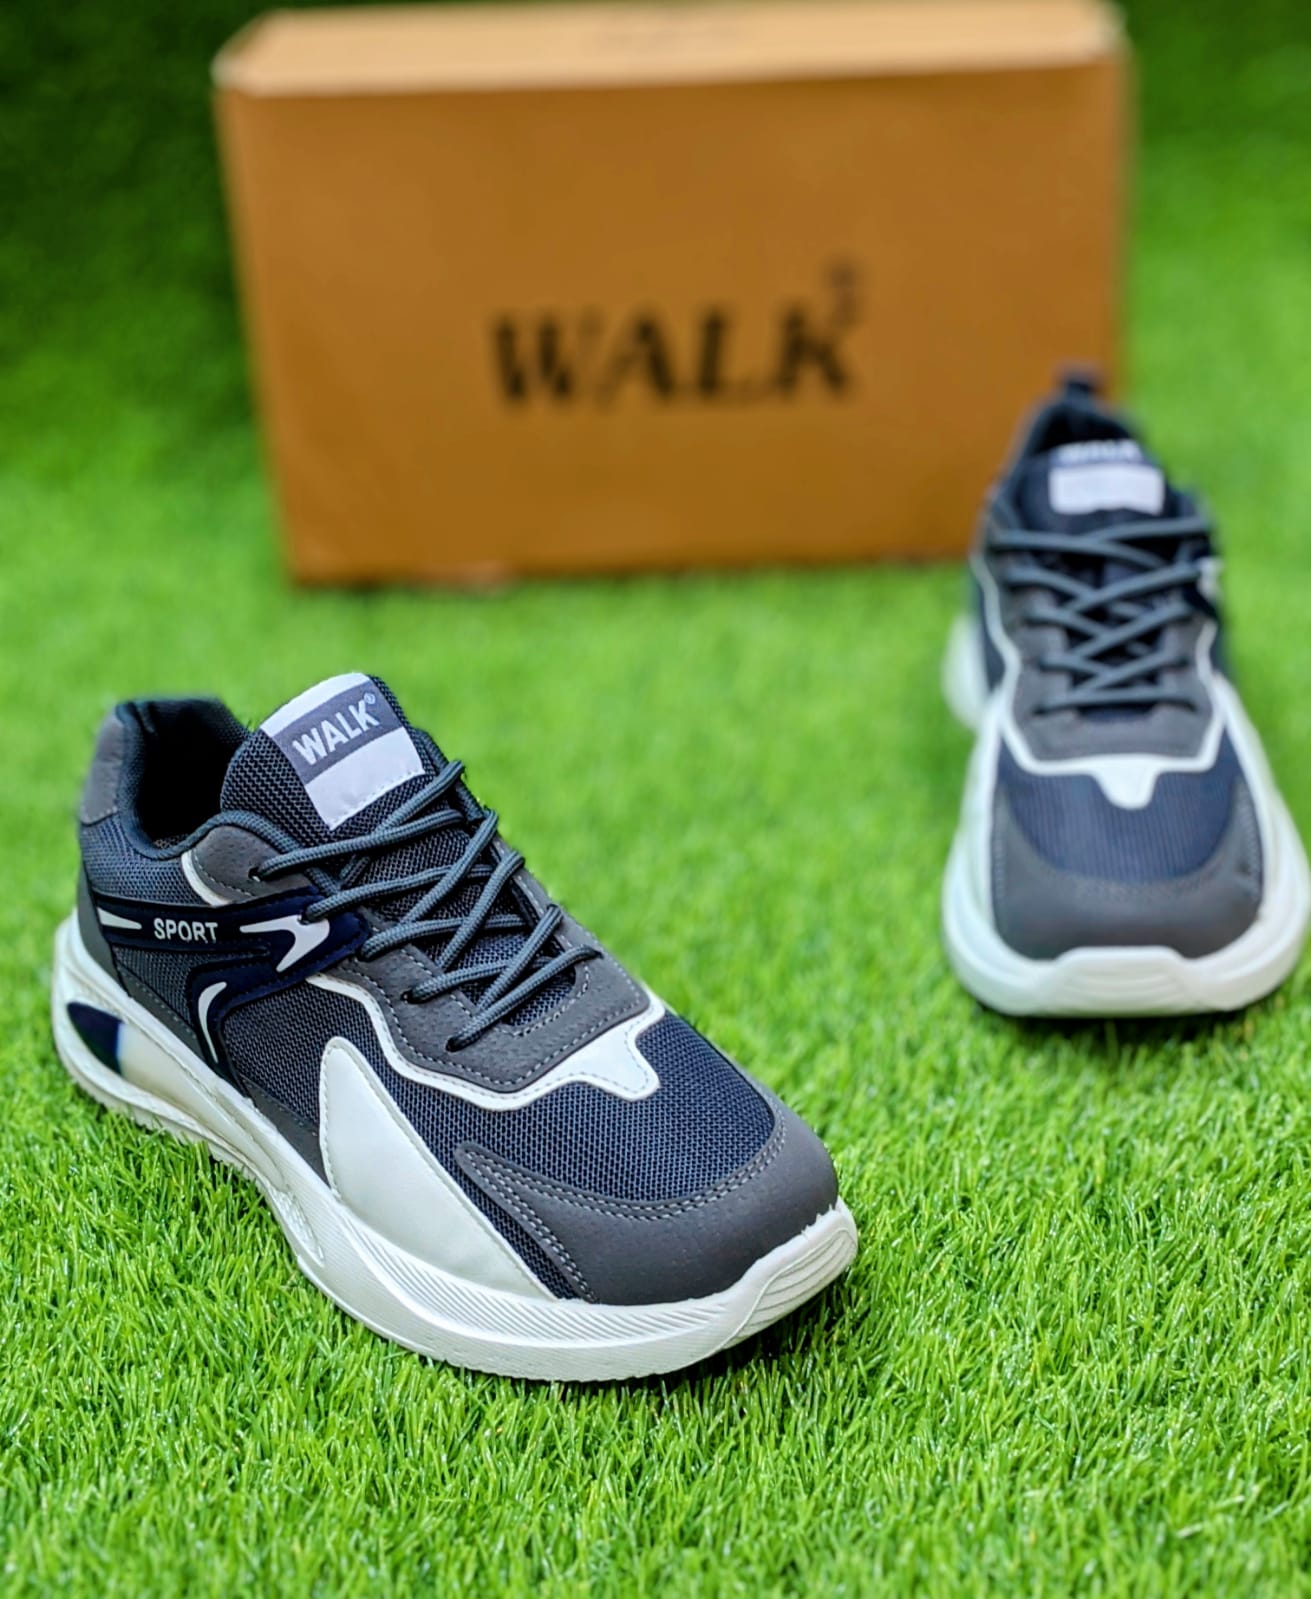 Walk - Thick Sole Shoes - Grey White